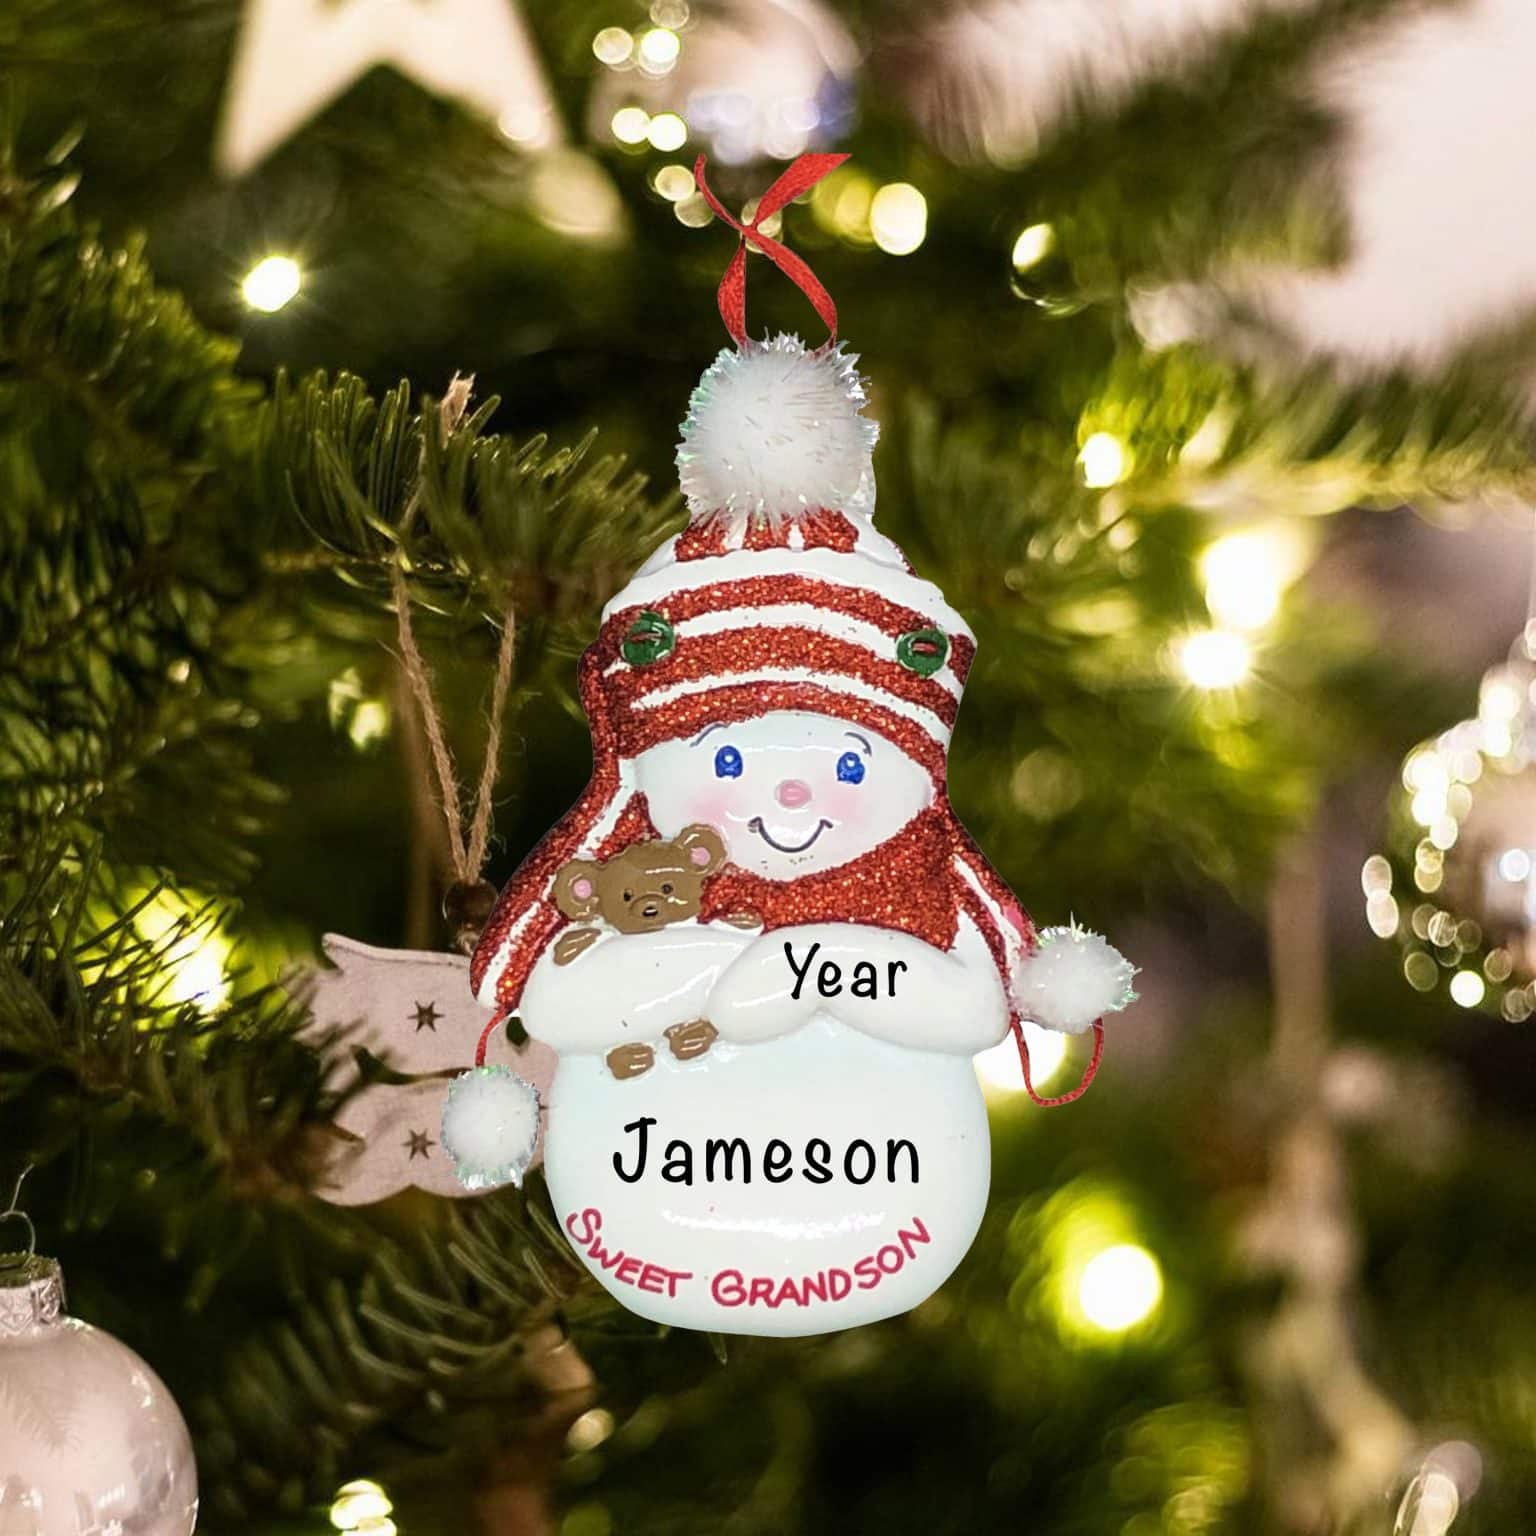 Grandson Personalized Christmas Ornament Fast Shipping